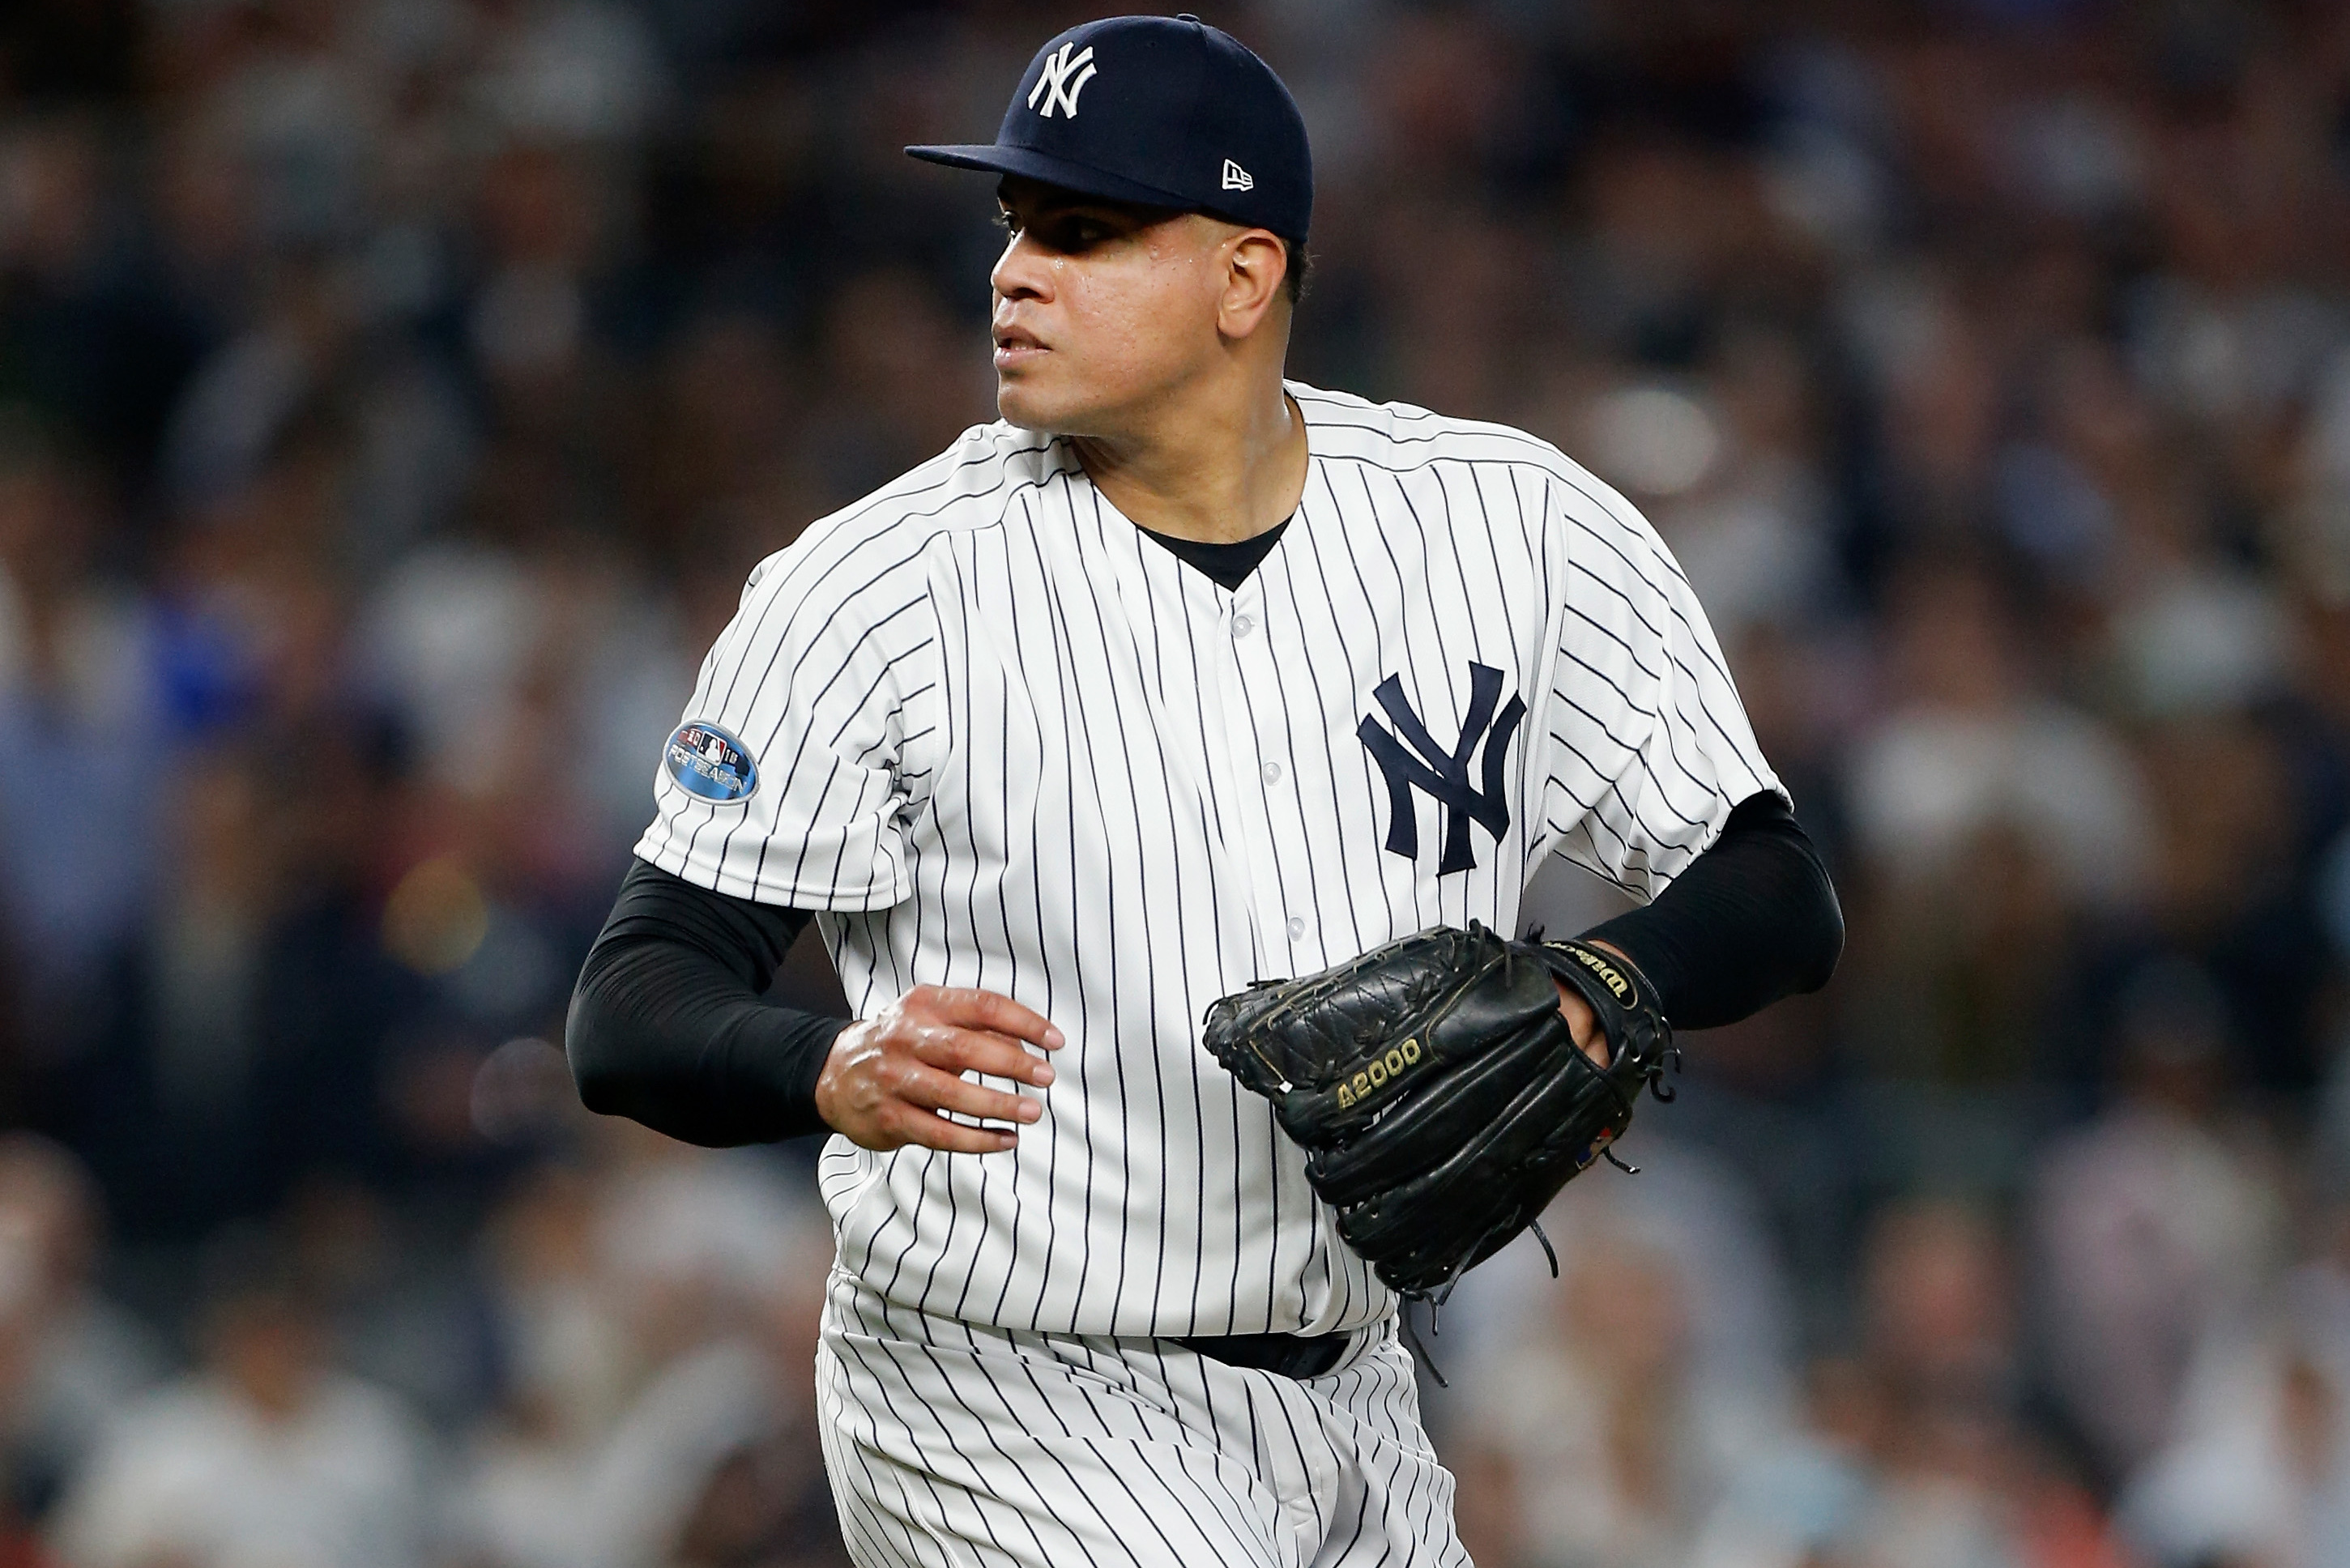 NY Yankees reliever Dellin Betances upbeat, despite early struggles